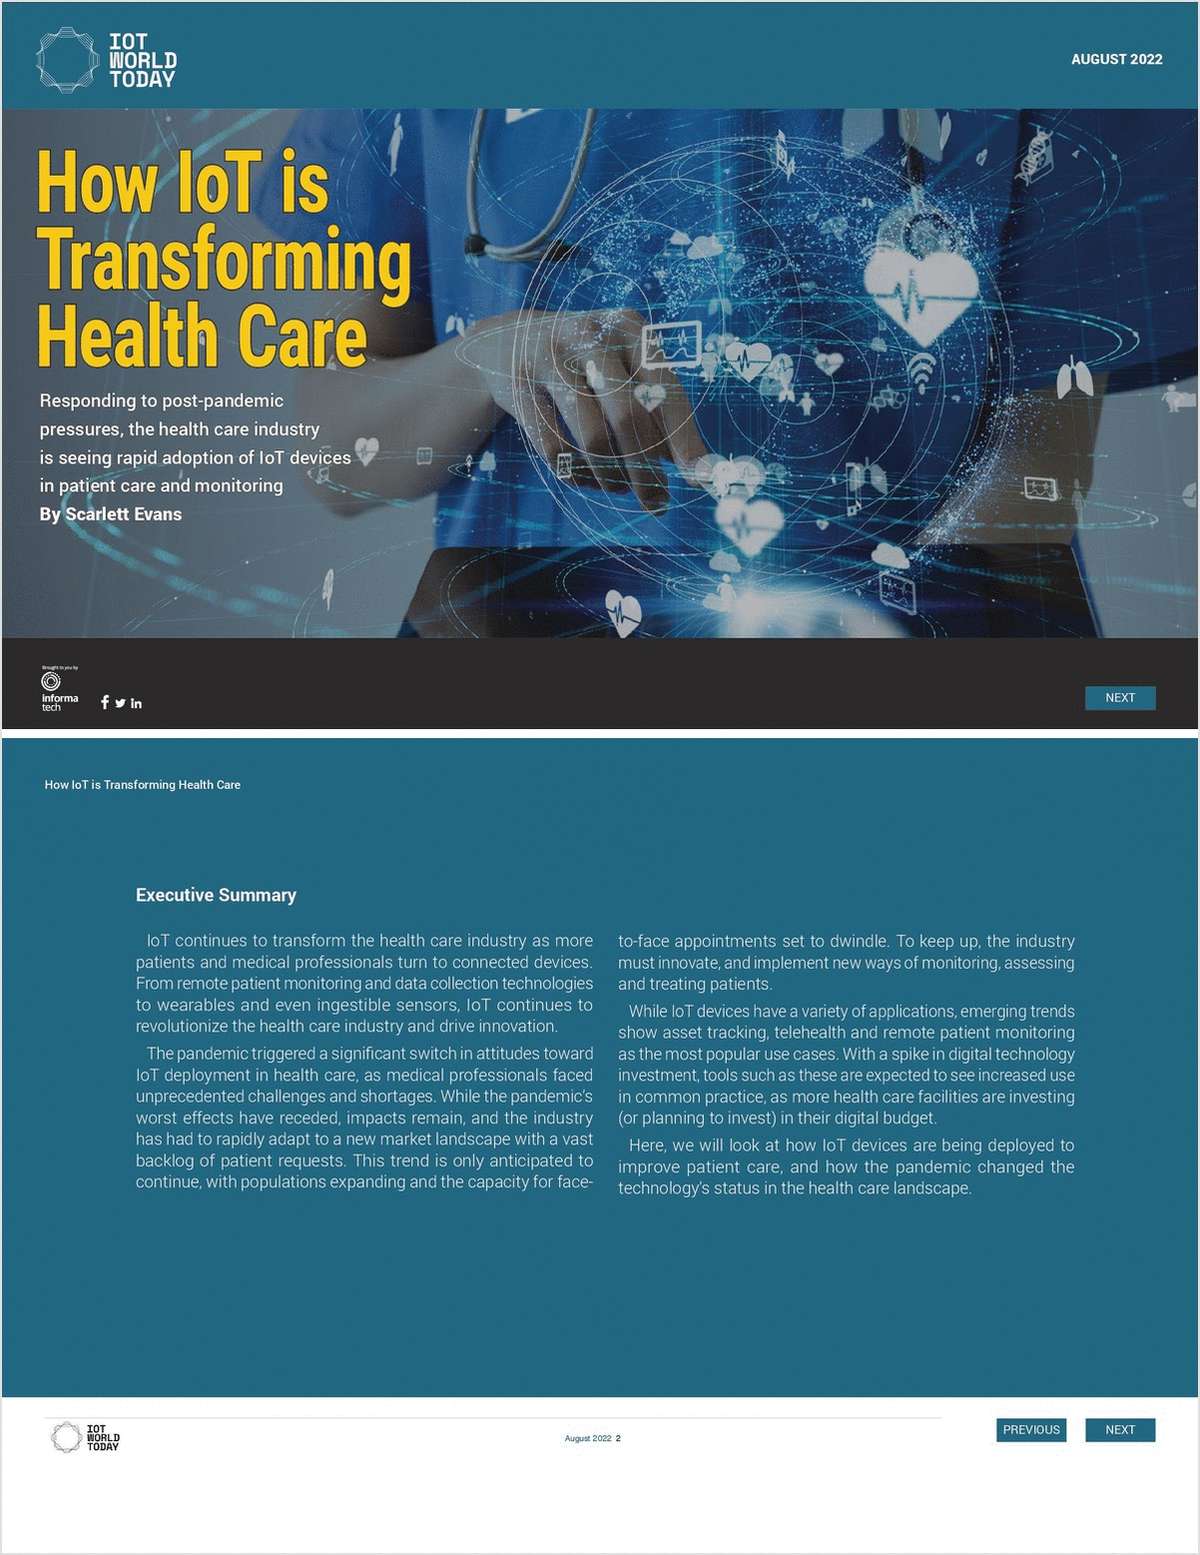 How IoT is Transforming Health Care